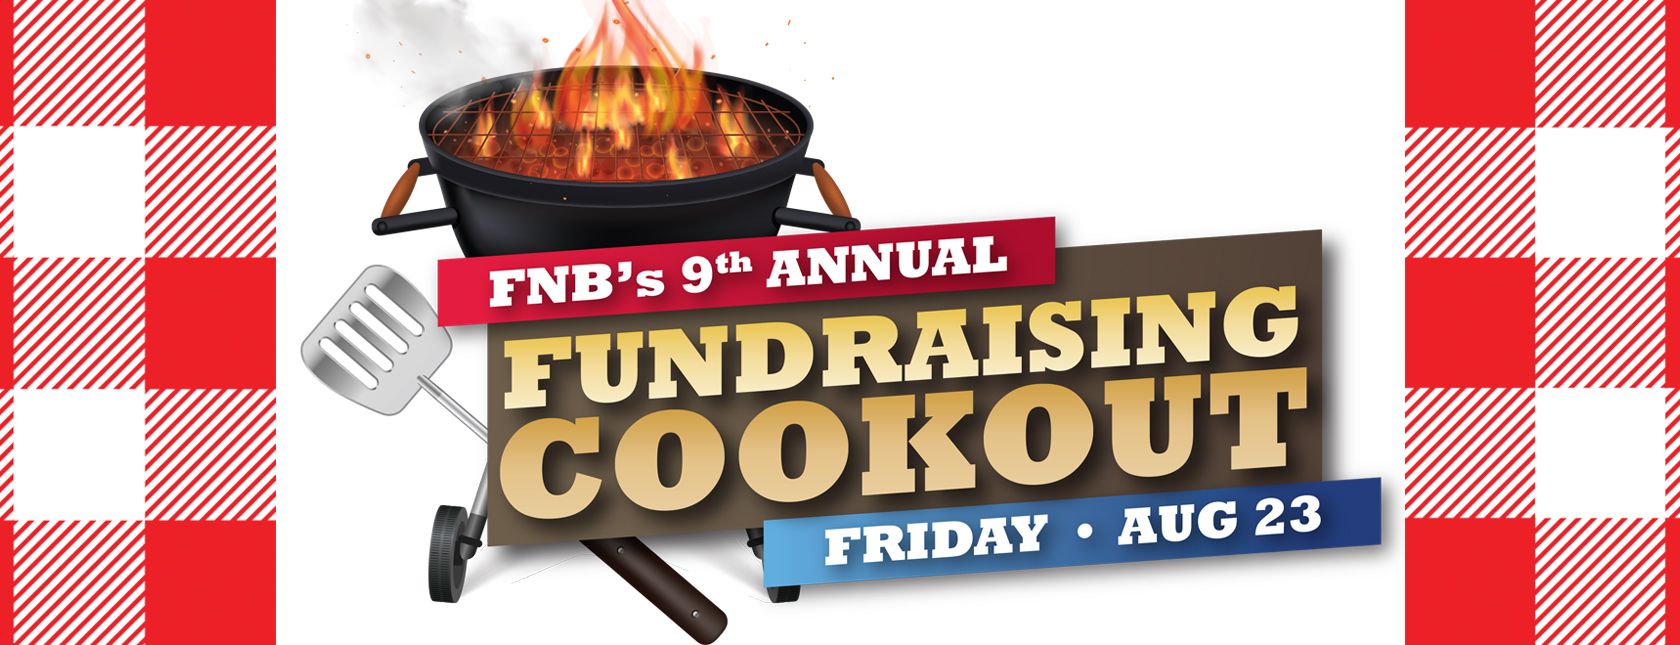 Fundraising Cookout to Benefit Feeding America and Child Advocacy